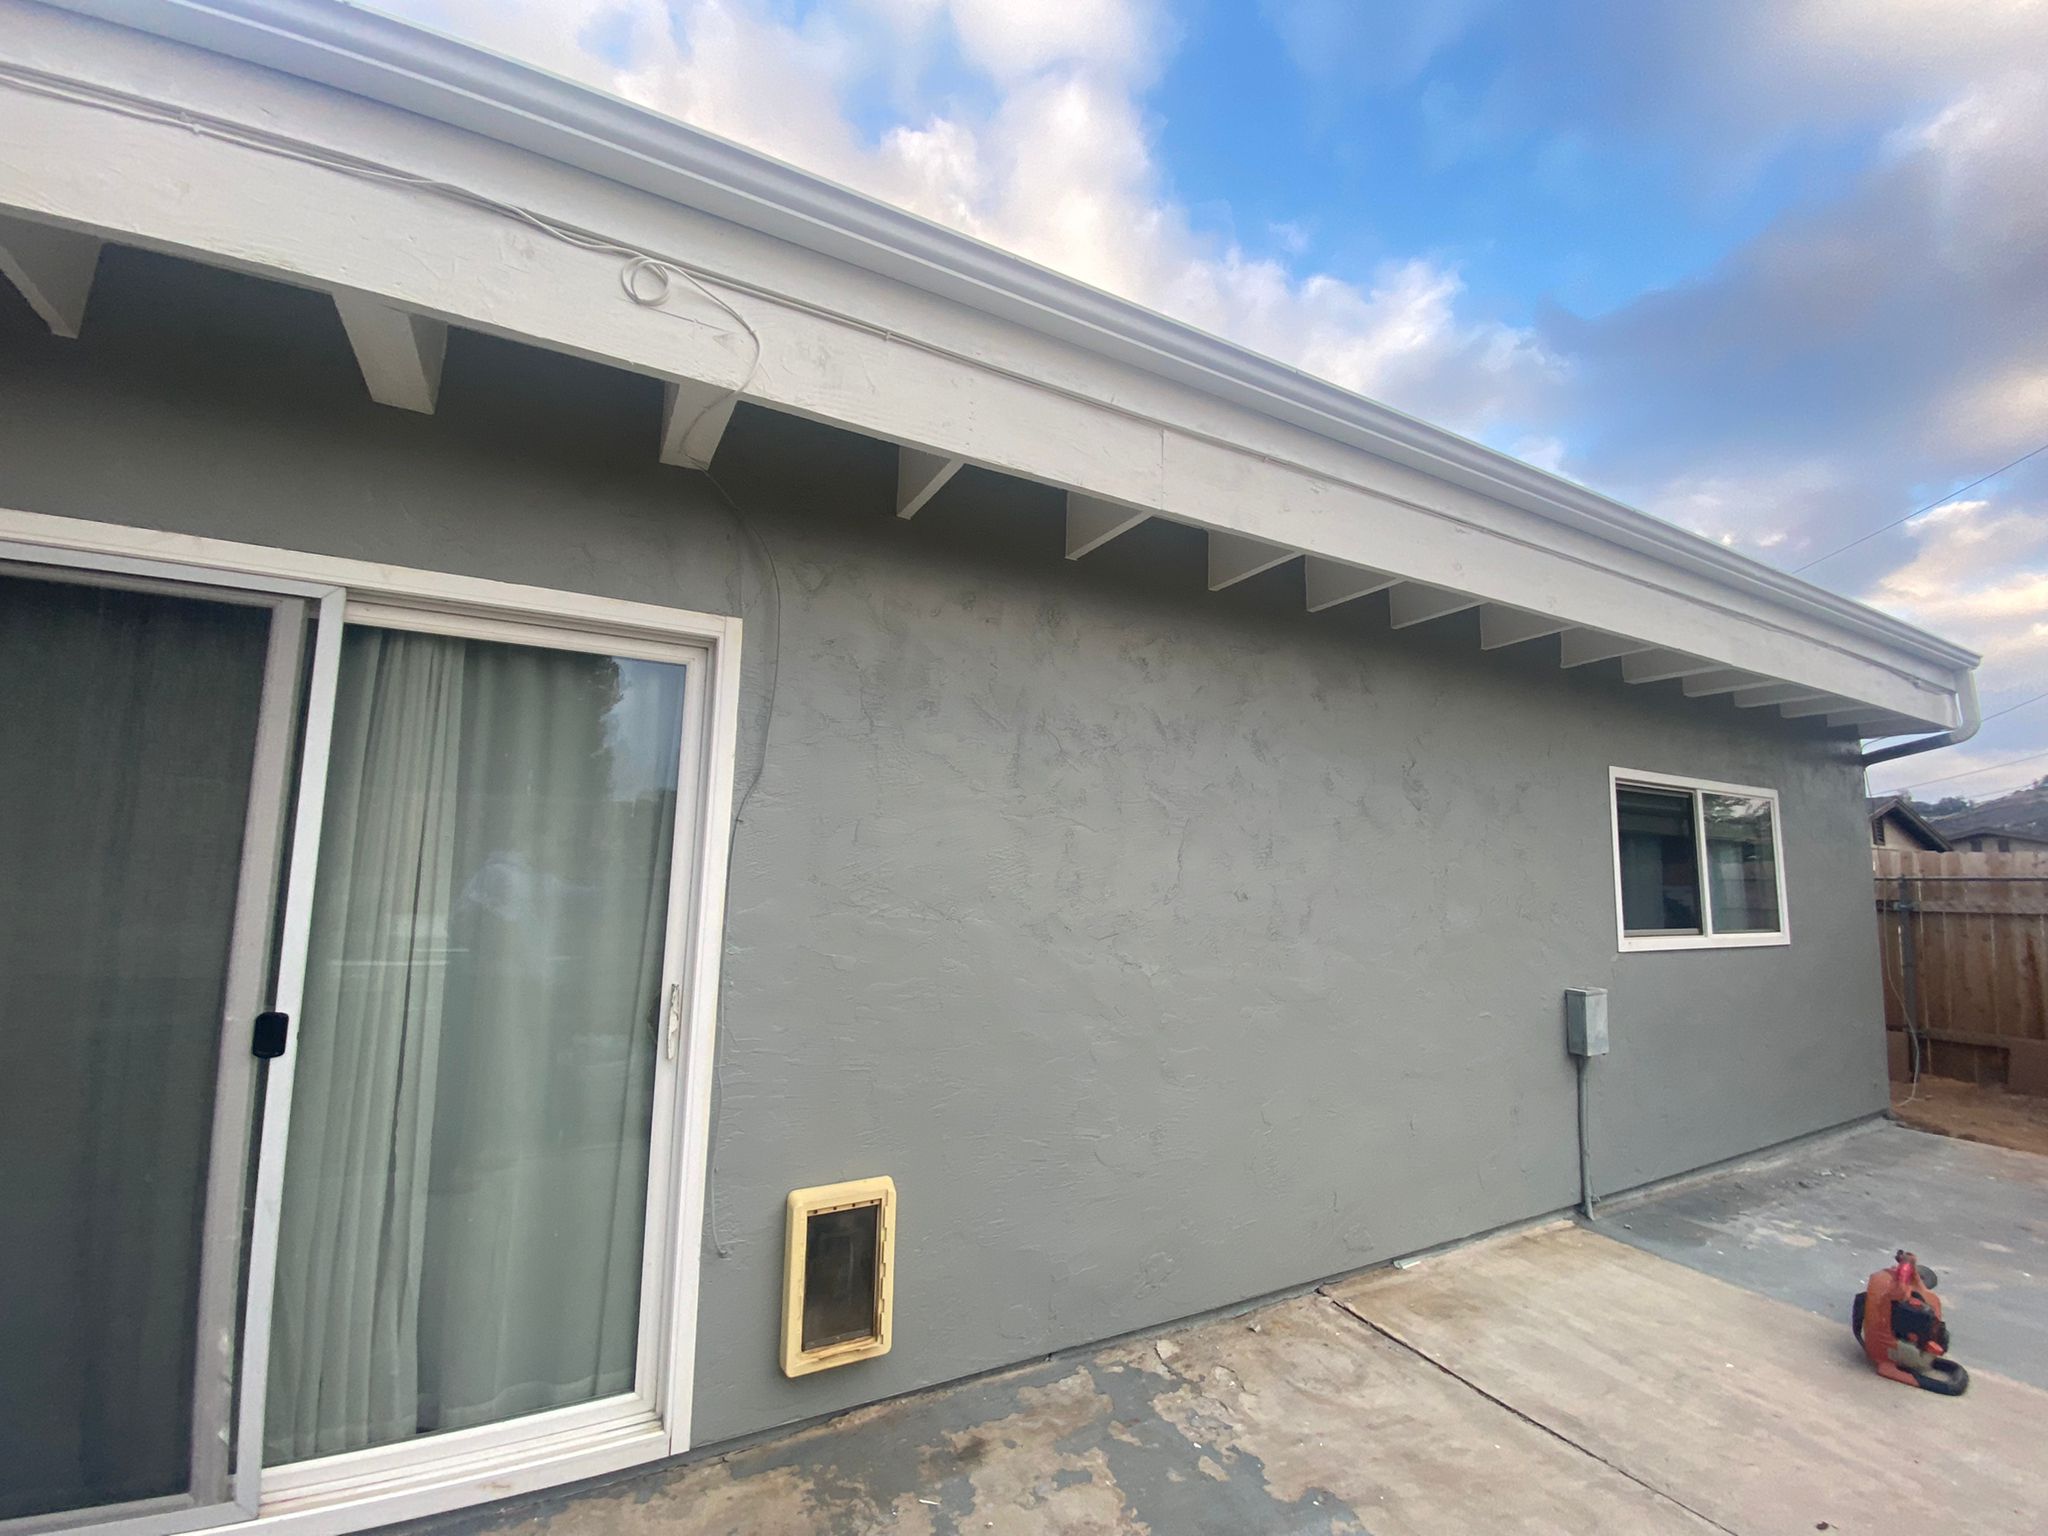 Coolwall Texcote Application in Carlsbad, CA 92019